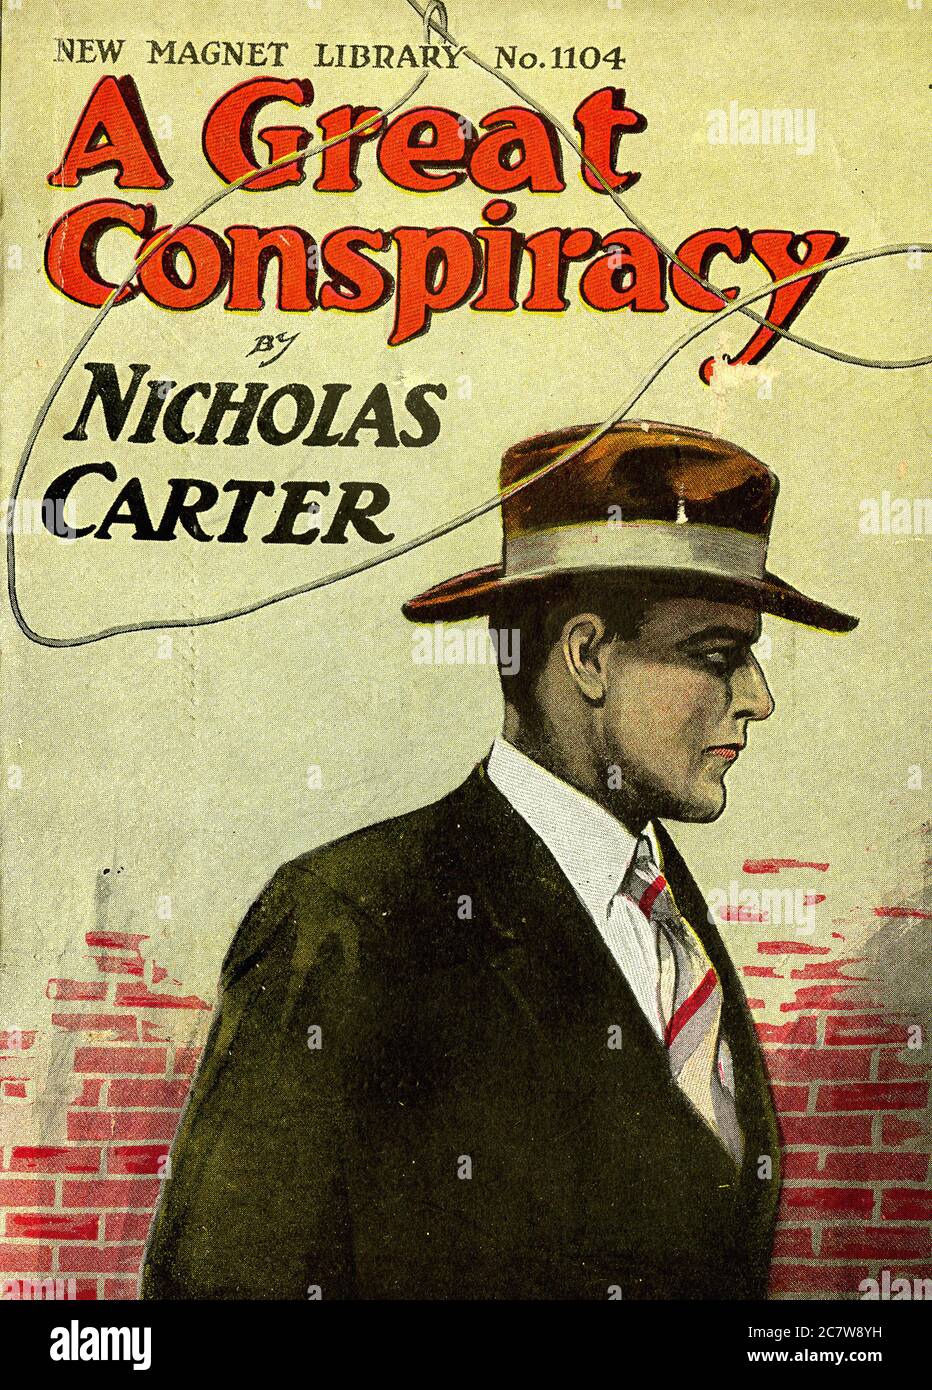 Nicholas Carter - A Great Conspiracy by Nicholas Carter - New Magnet Library - Vintage Pulp Literary Stock Photo